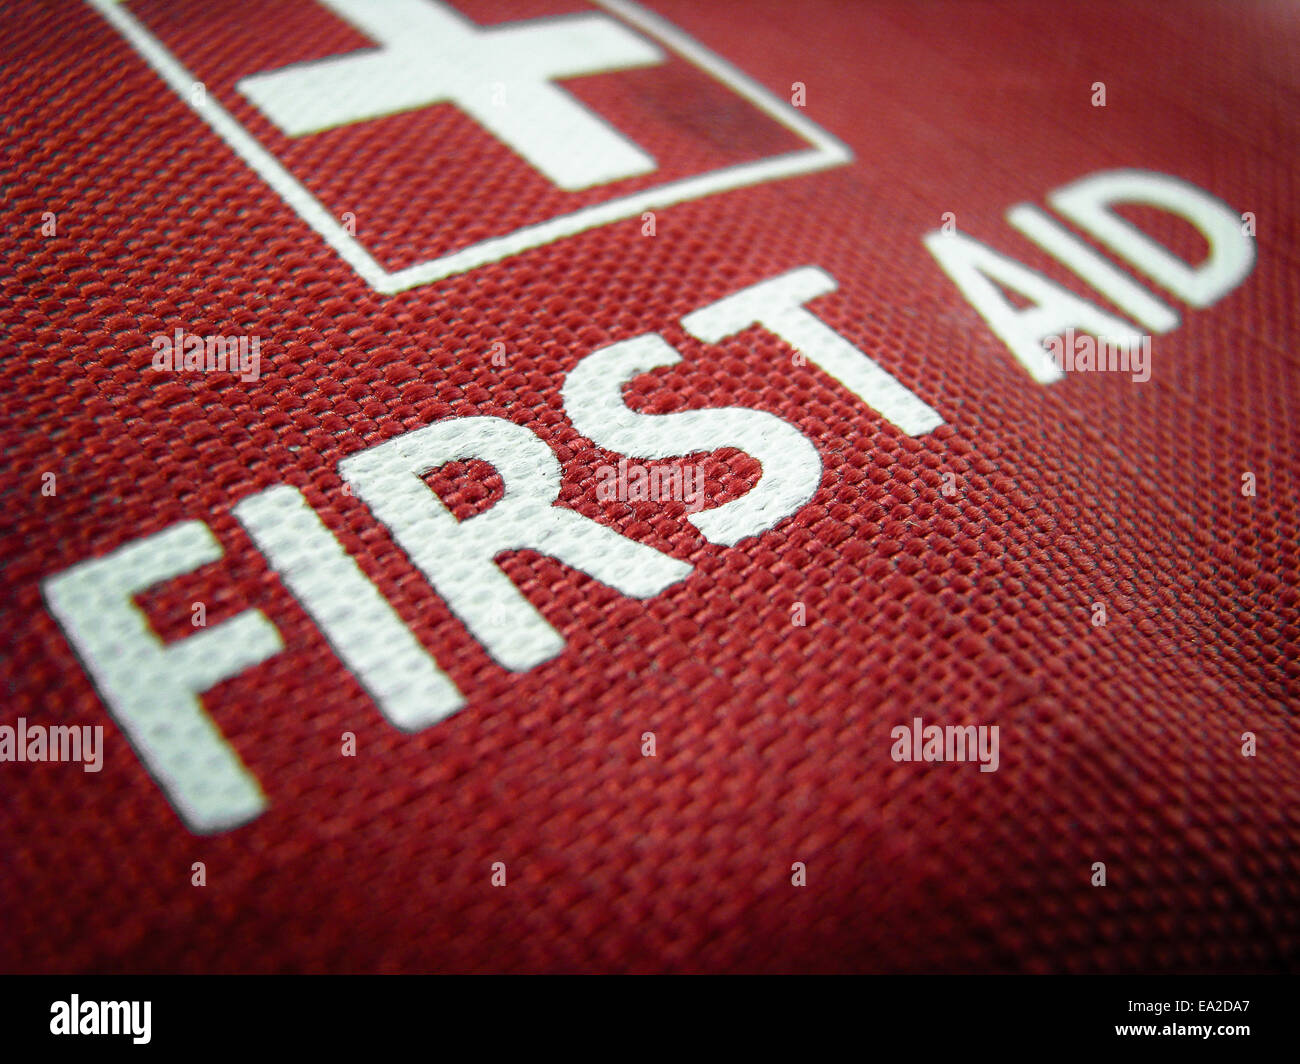 Medical Image Of A First Aid Kit Or Pack Stock Photo